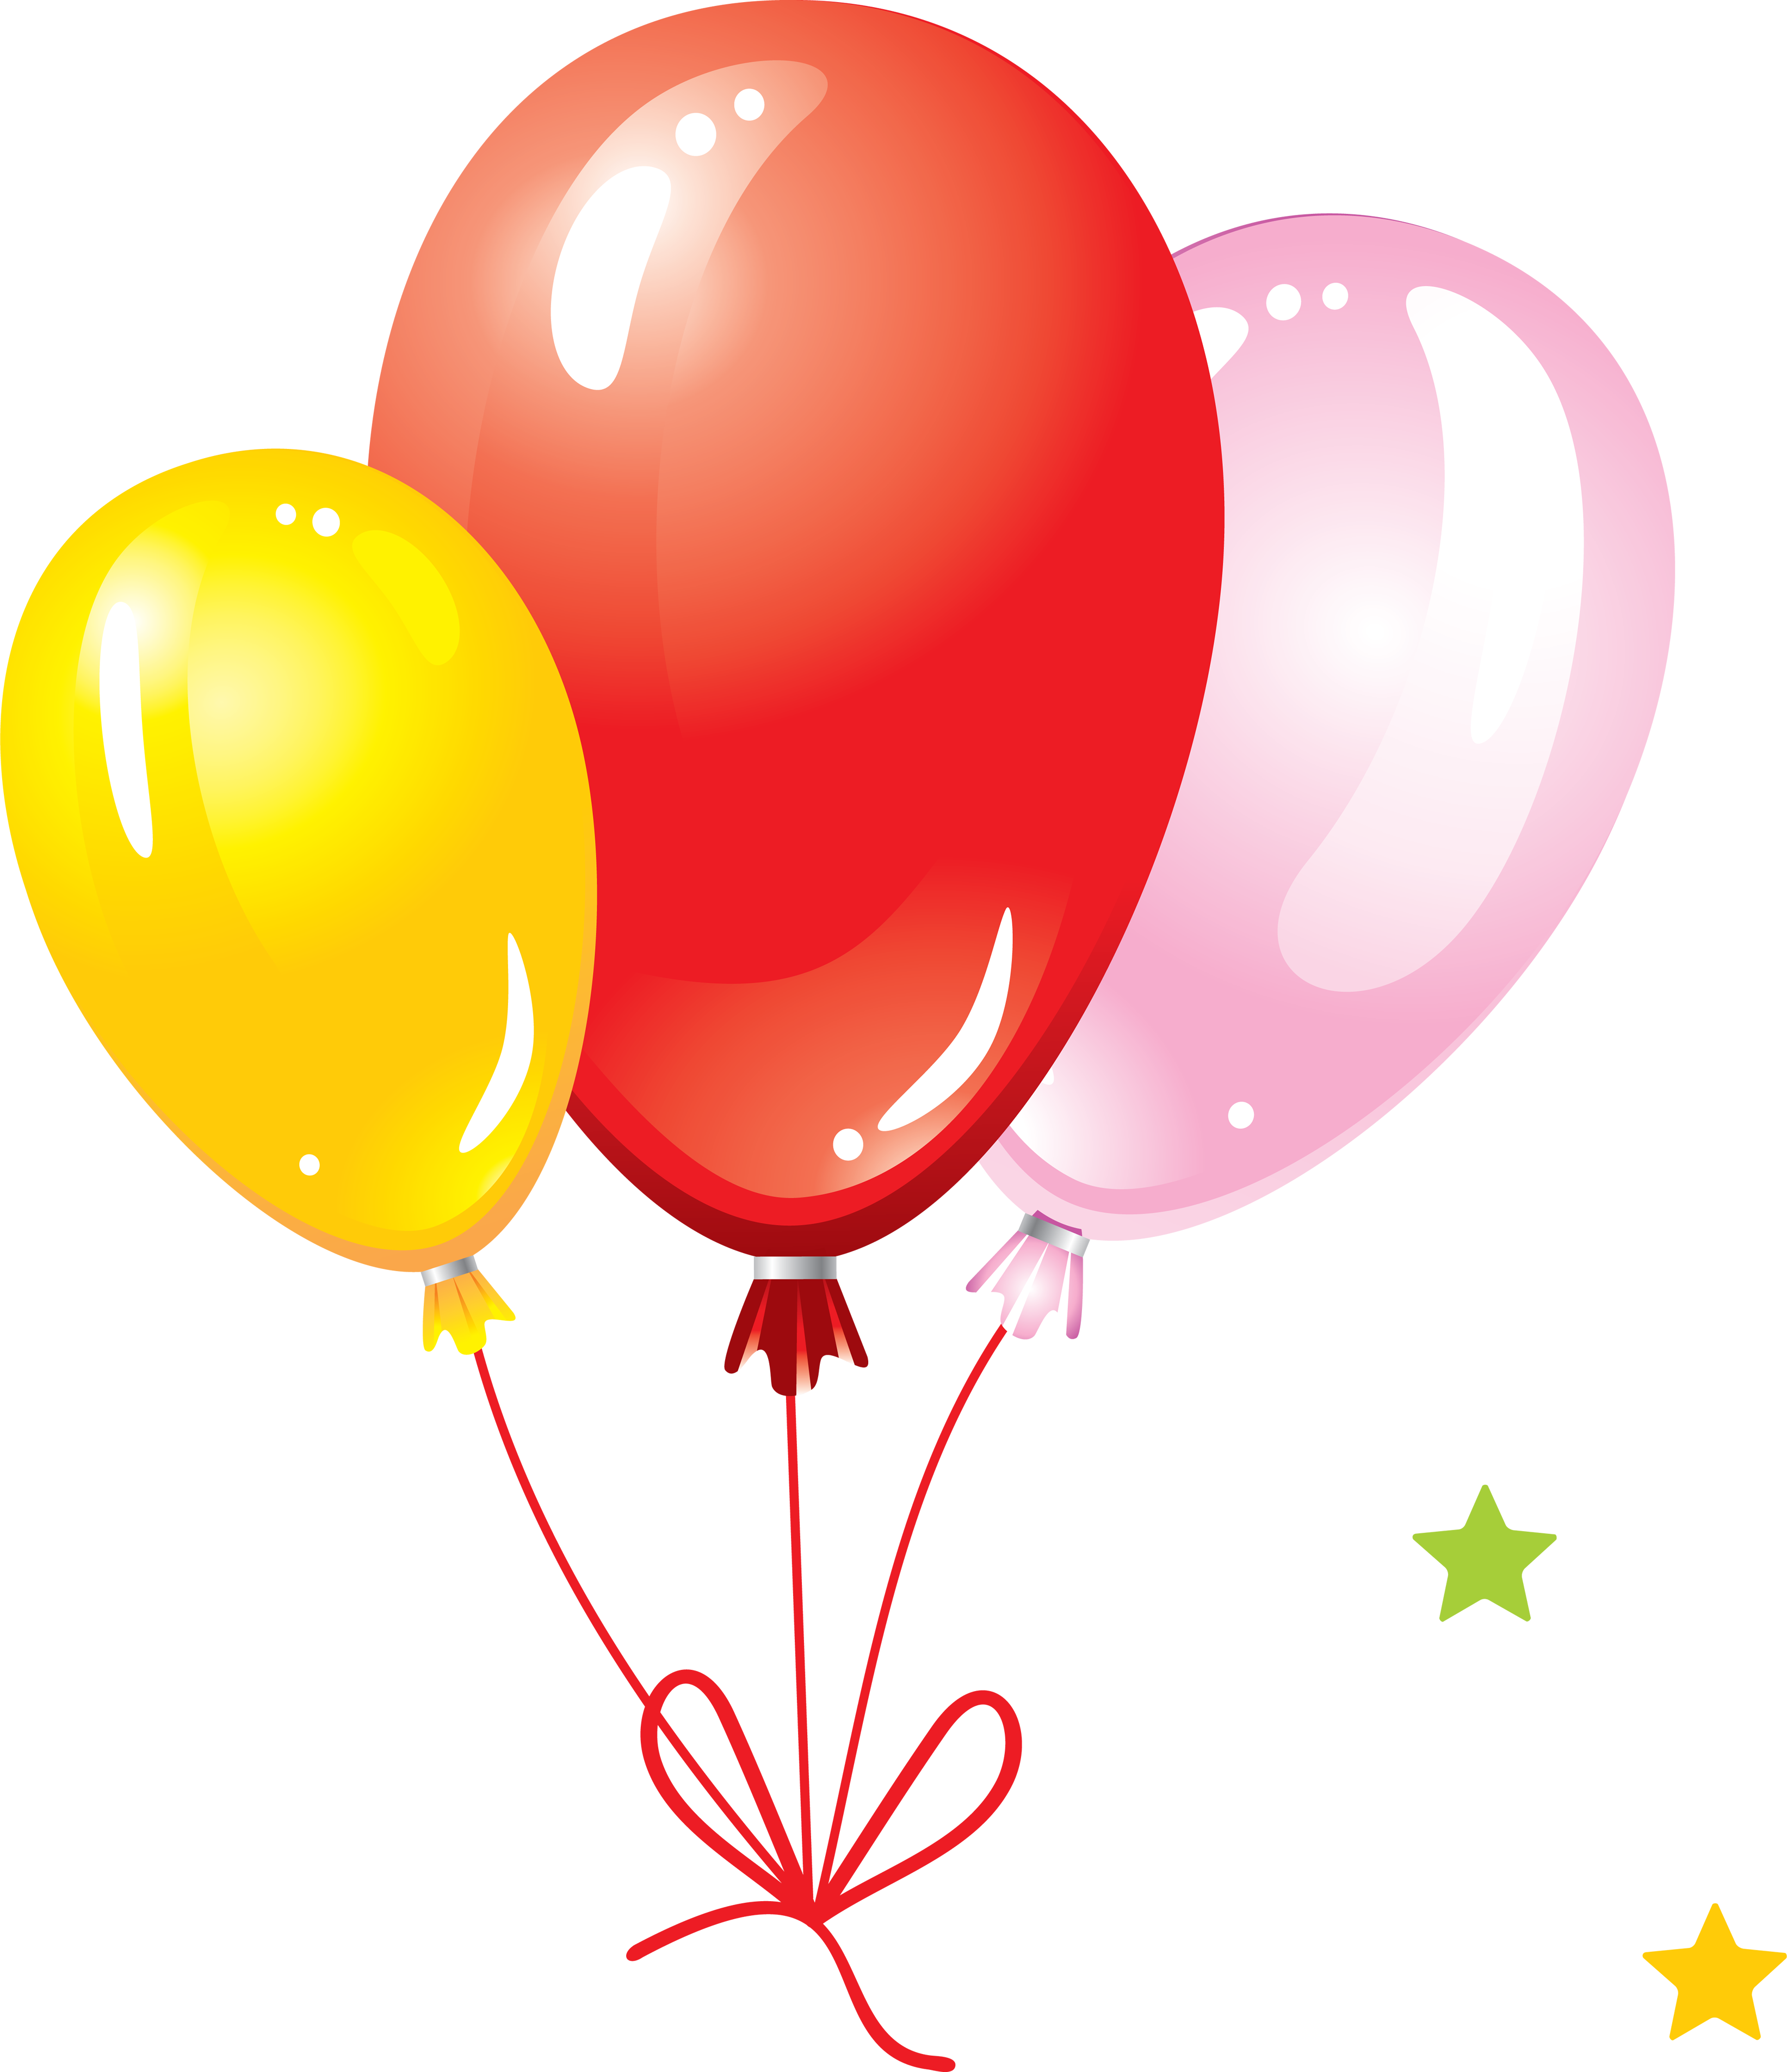 Free Free Balloon Images, Download Free Clip Art, Free ...